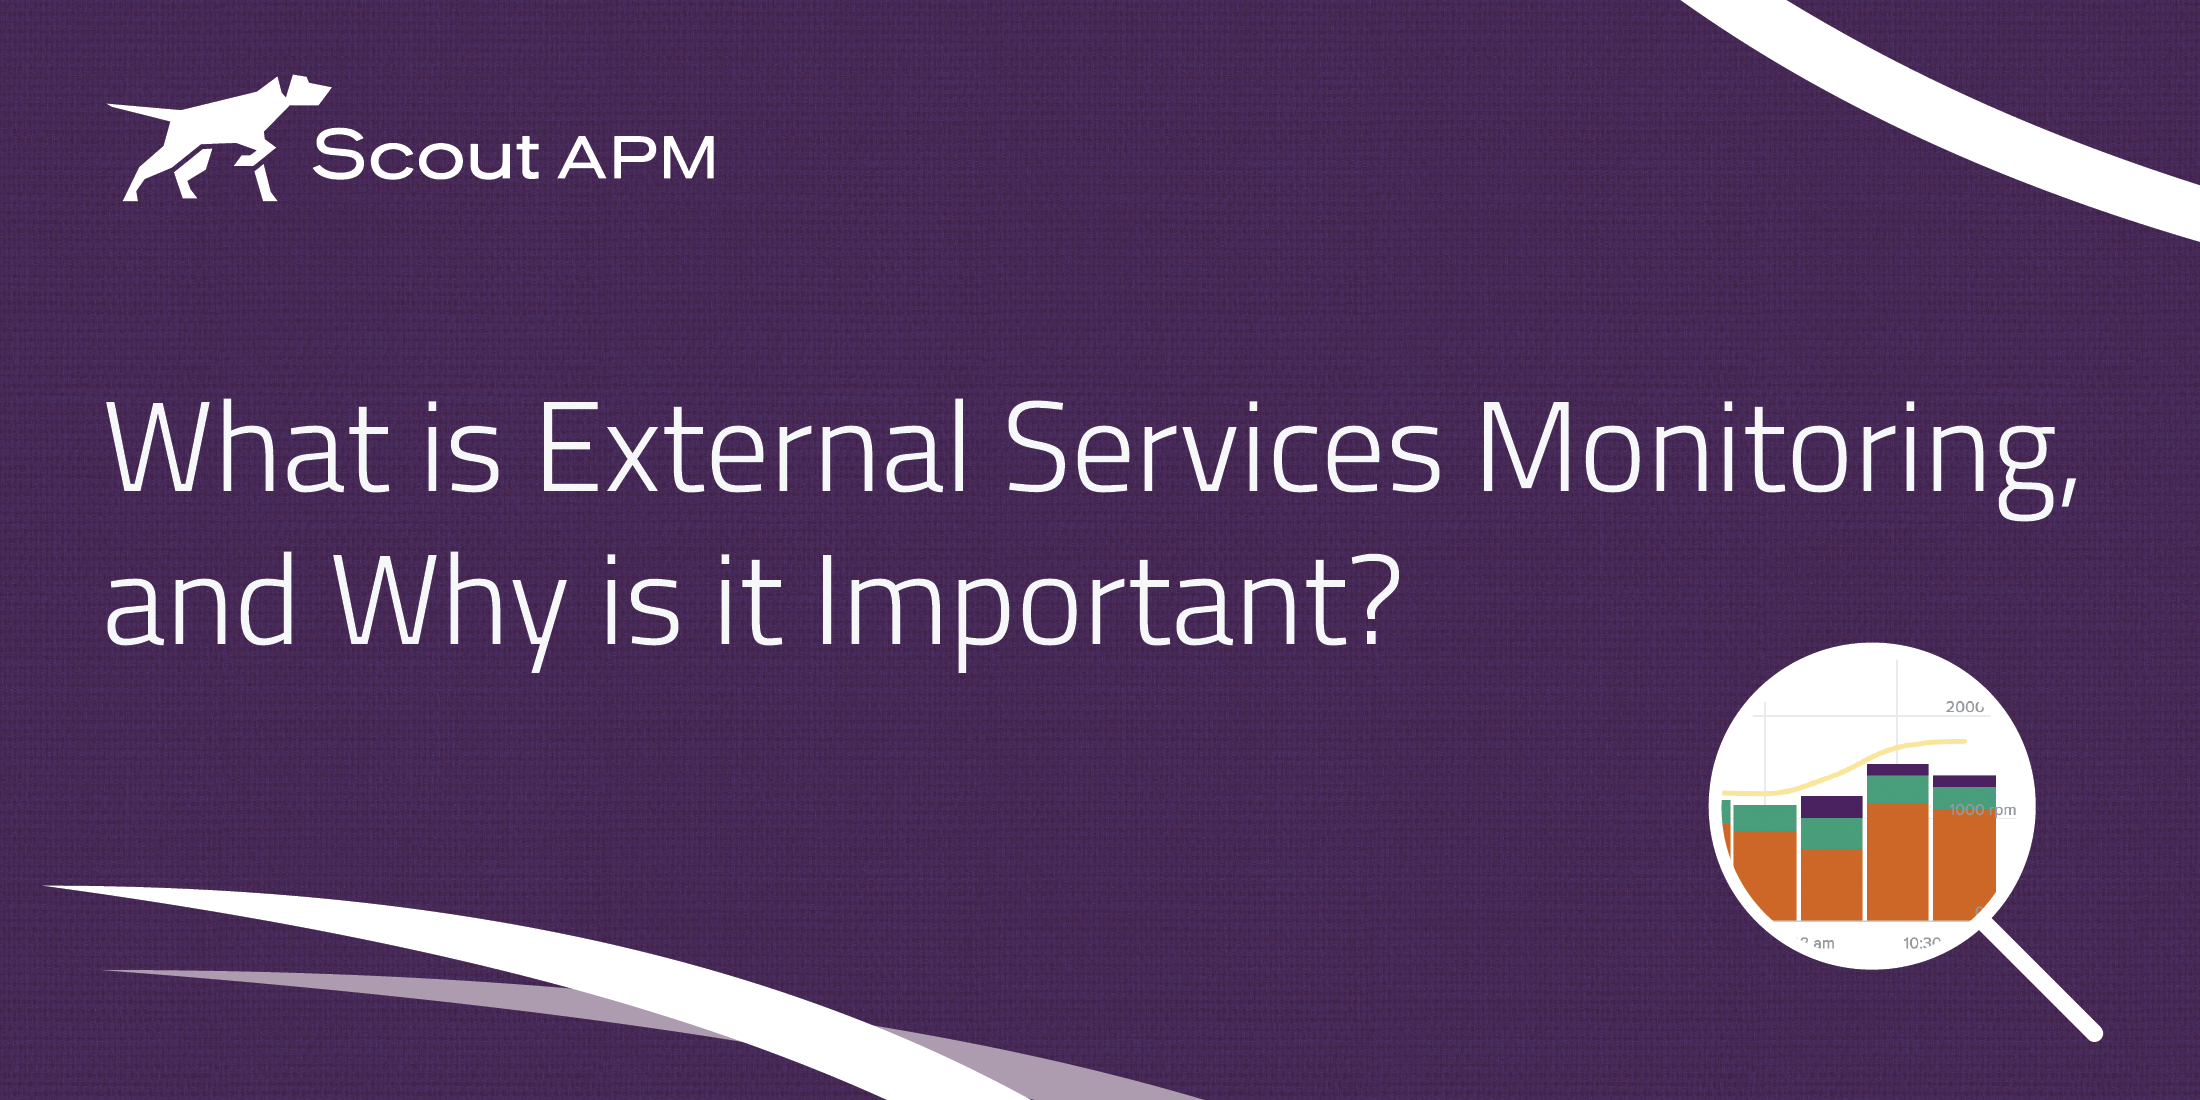 What is External Services Monitoring, and Why is it Important? image